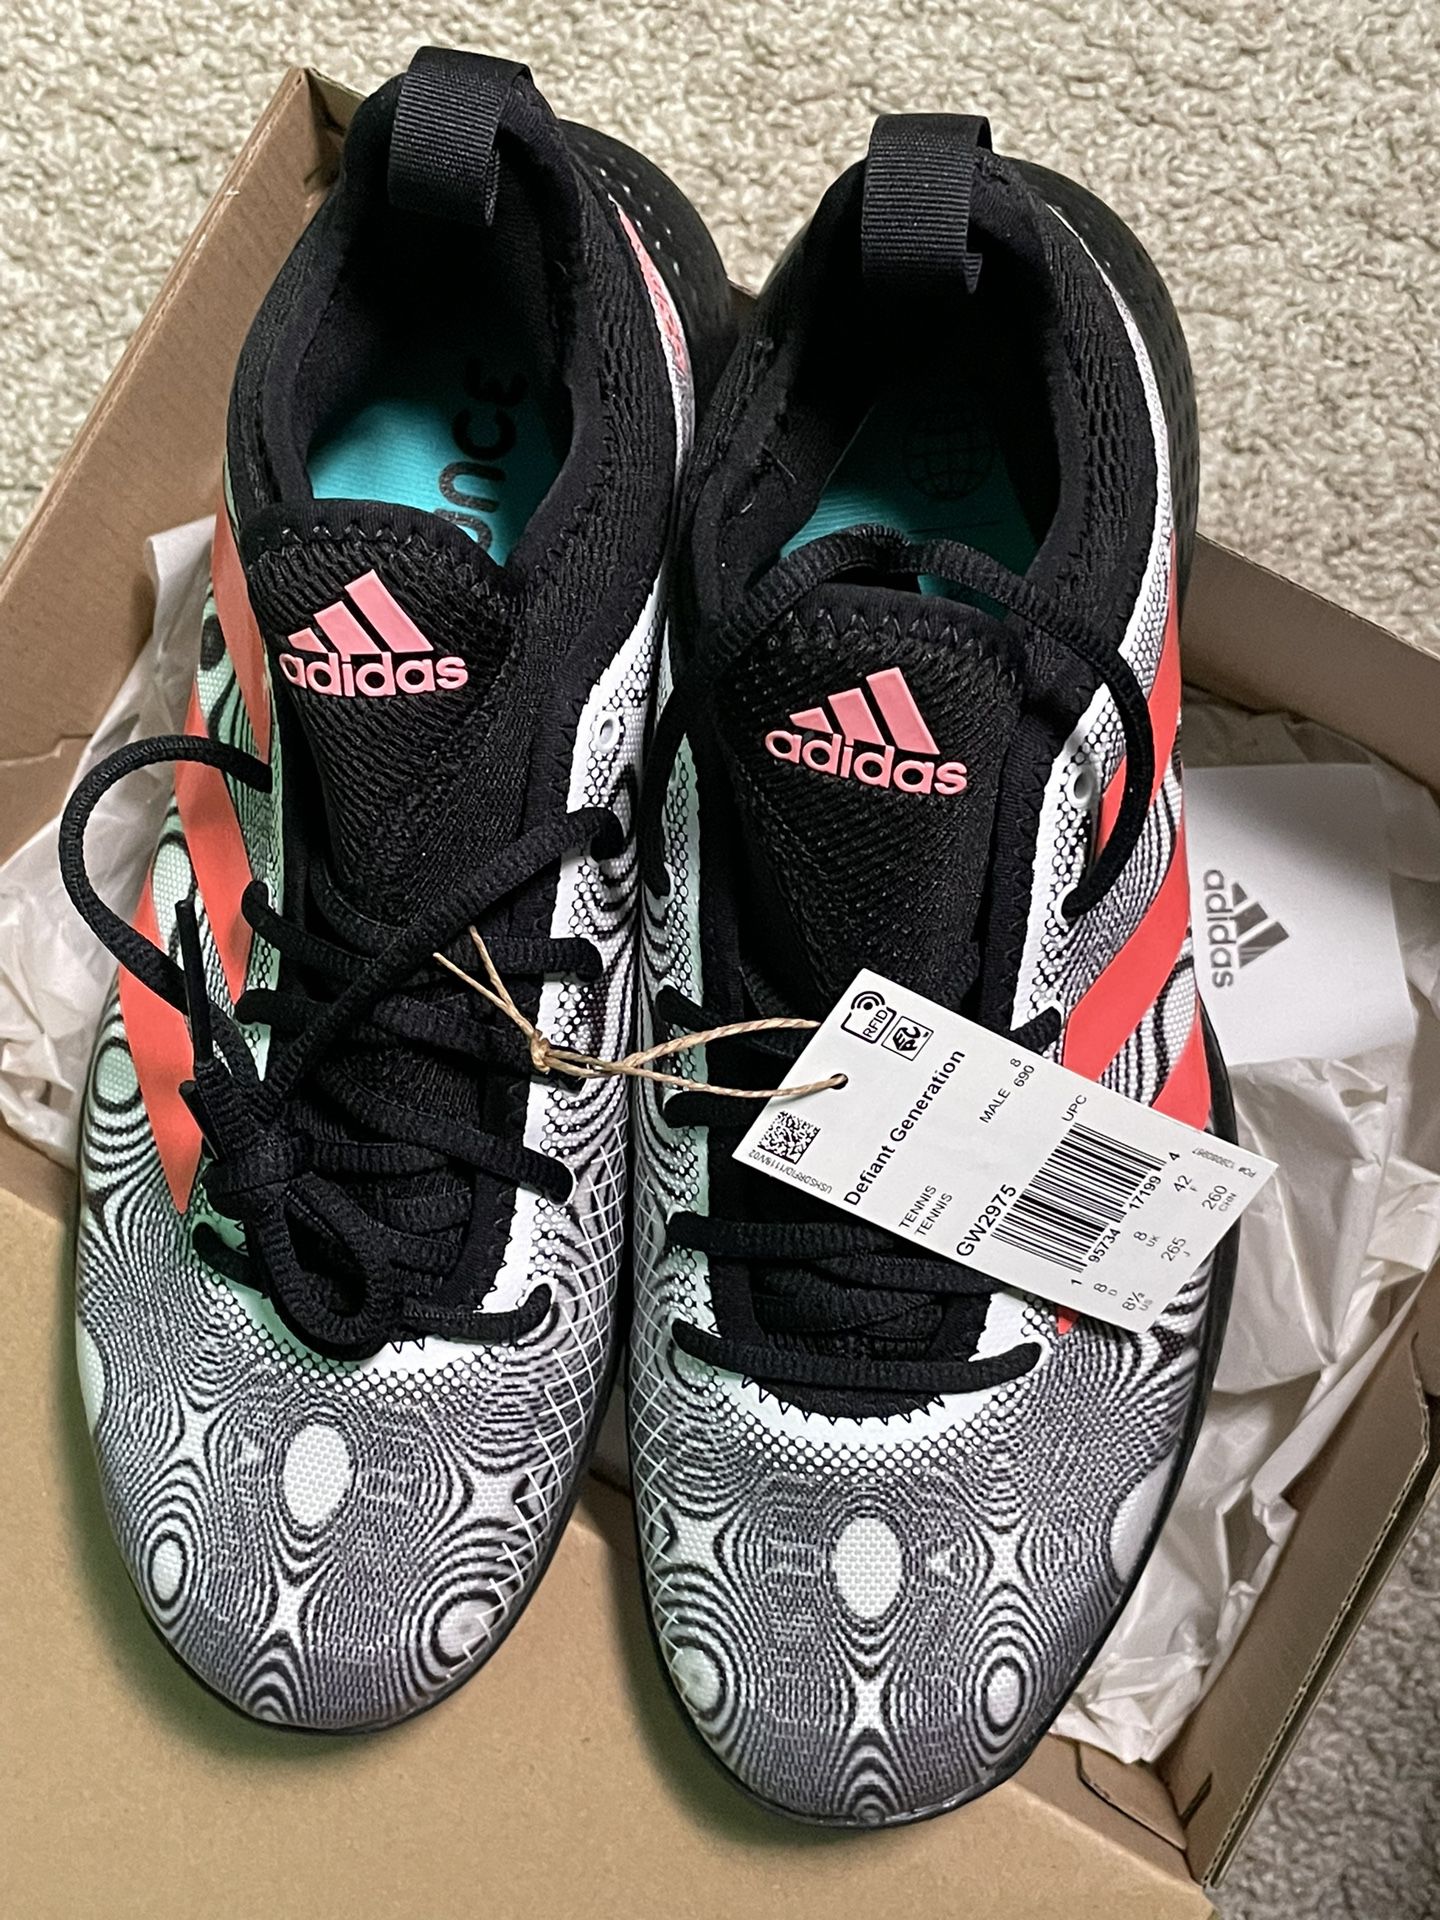 Men's Shoes for Sale in CA - OfferUp